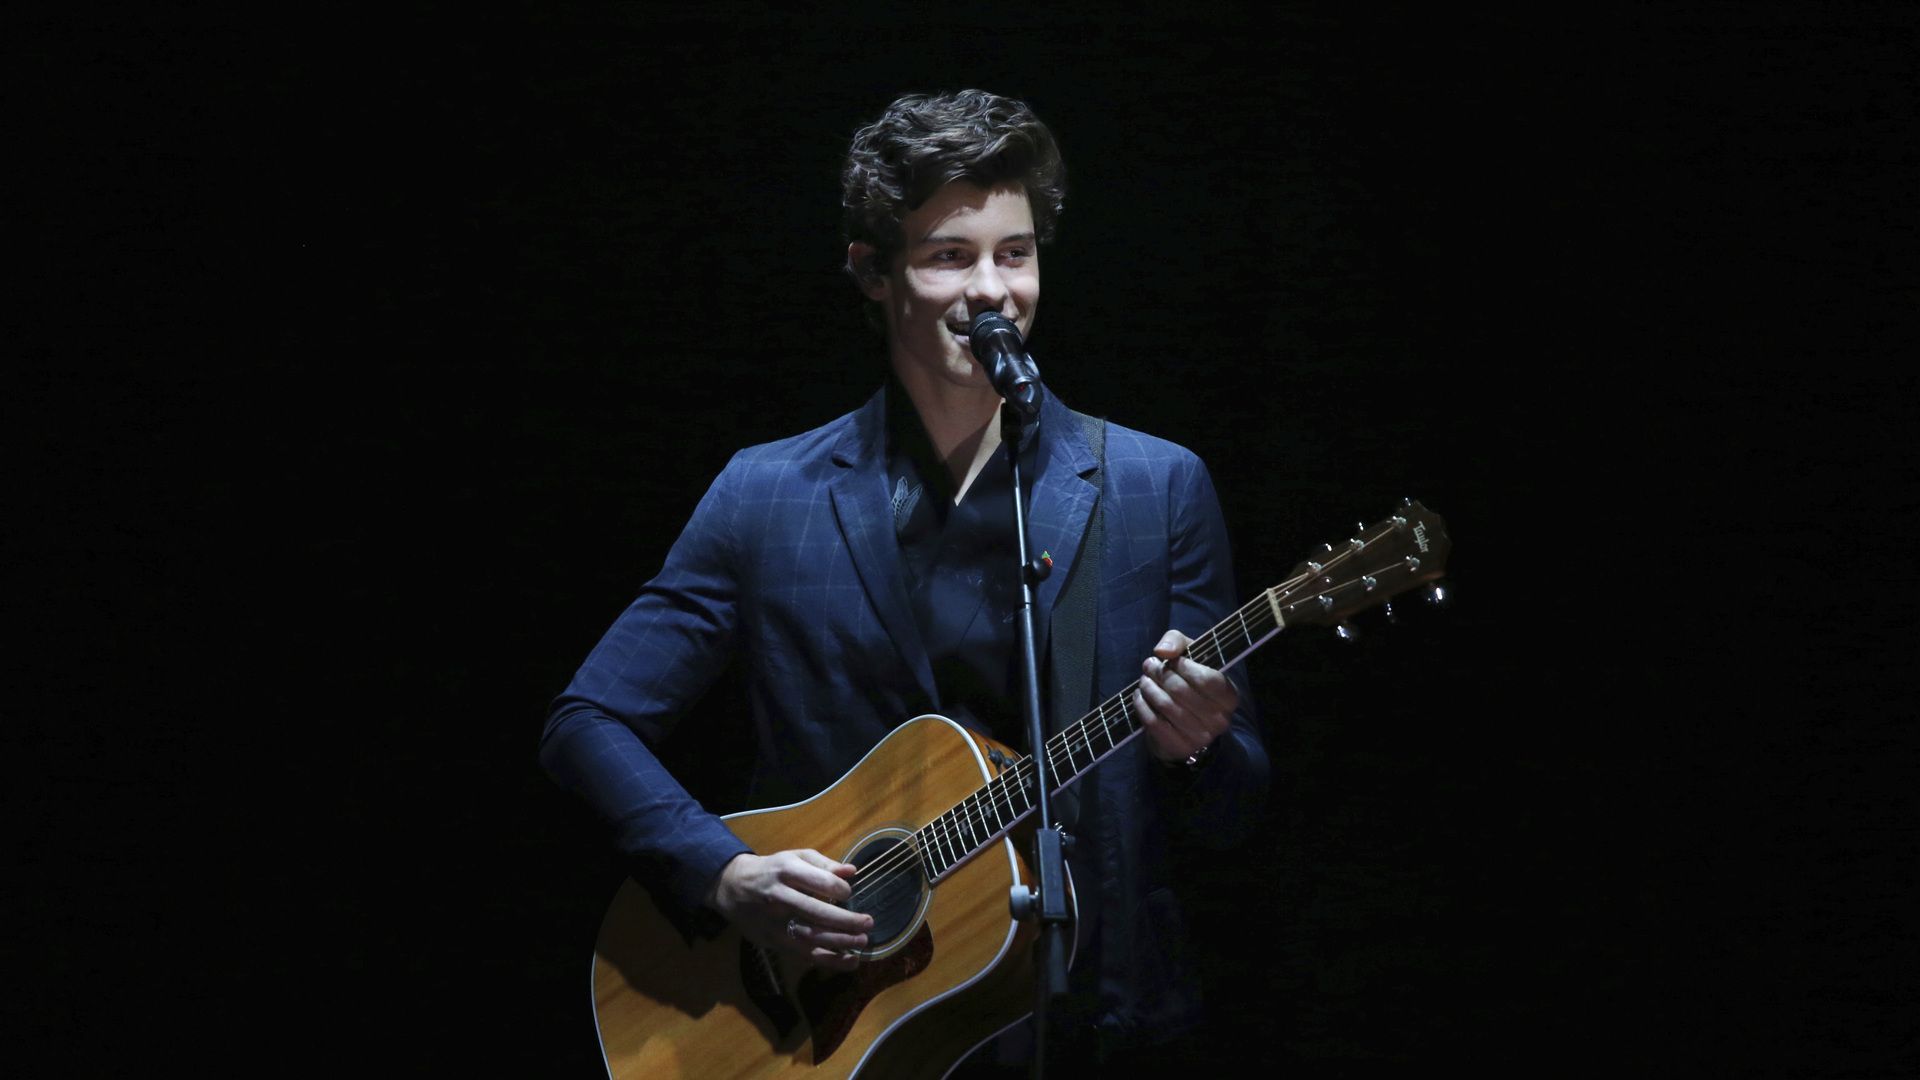 Shawn Mendes Laptop Full HD 1080P HD 4k Wallpaper Image Background Photo and. Shawn mendes wallpaper, Shawn mendes photohoot, Shawn mendes